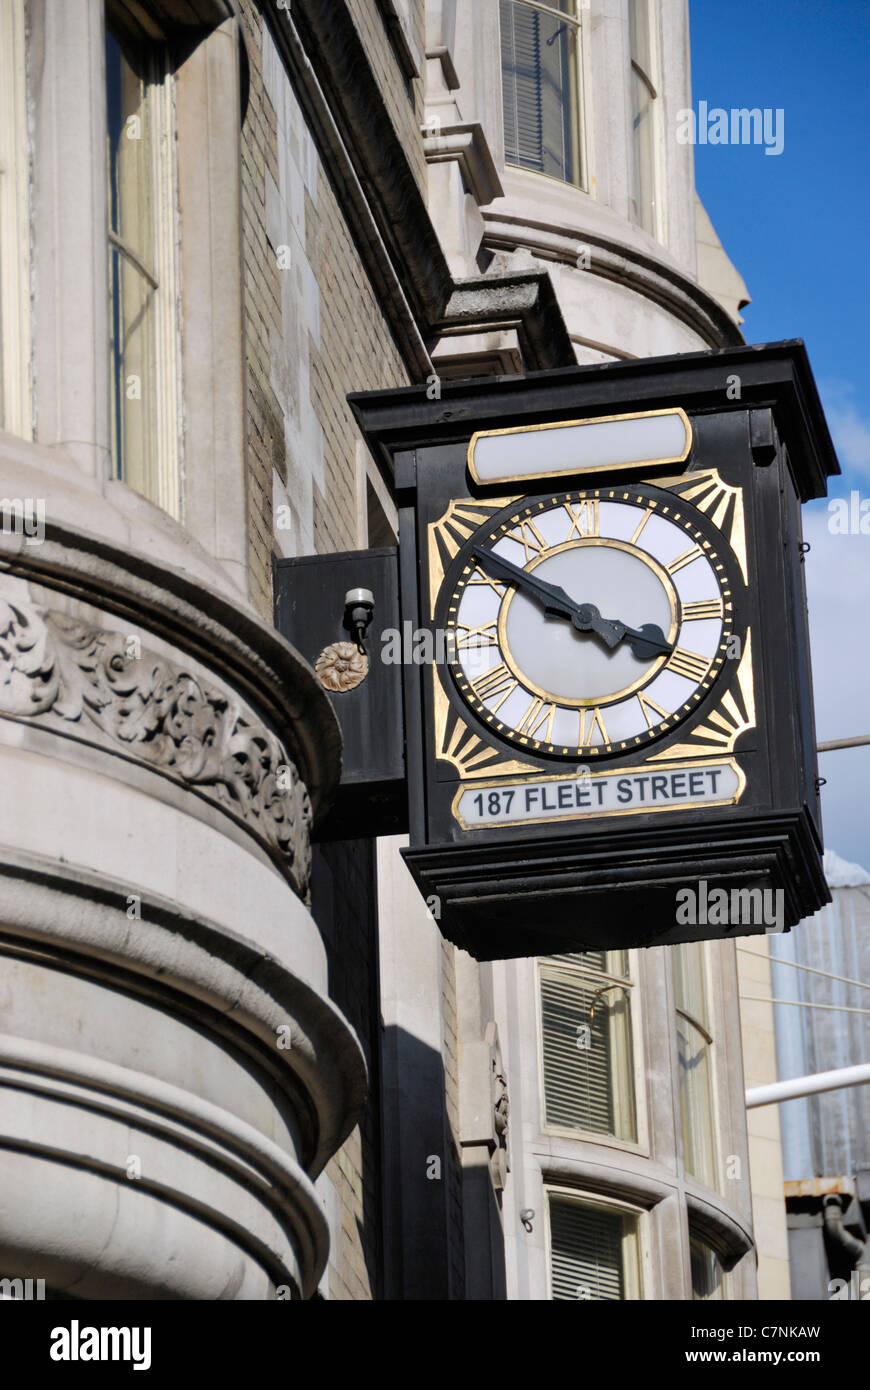 Old clock outside 187 Fleet Street, London, England. The building houses the legal chambers of Andrew Trollope QC. Stock Photo